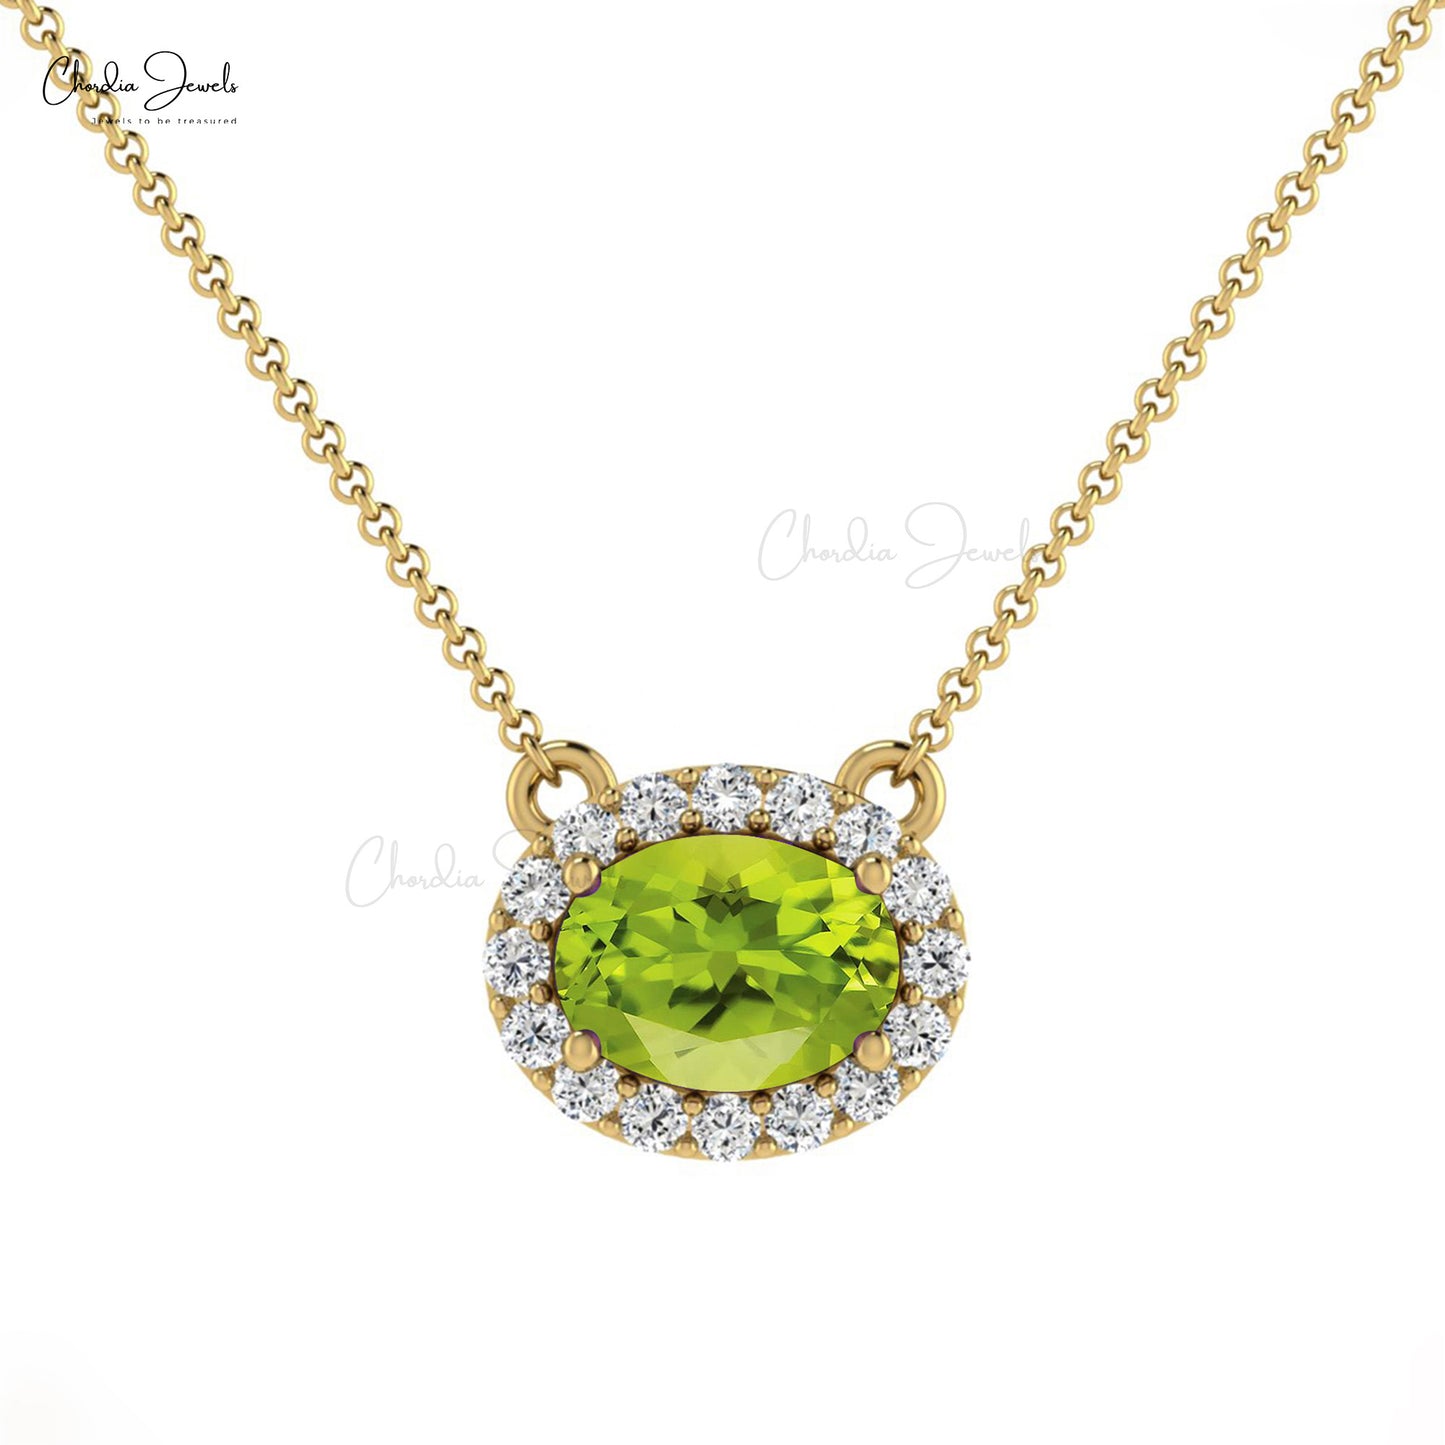 Natural Peridot and Diamond Necklace, 14k Solid Gold Necklace, 0.75 Carat Oval Faceted Gemstone Necklace, Bridesmaid Necklace for Gift